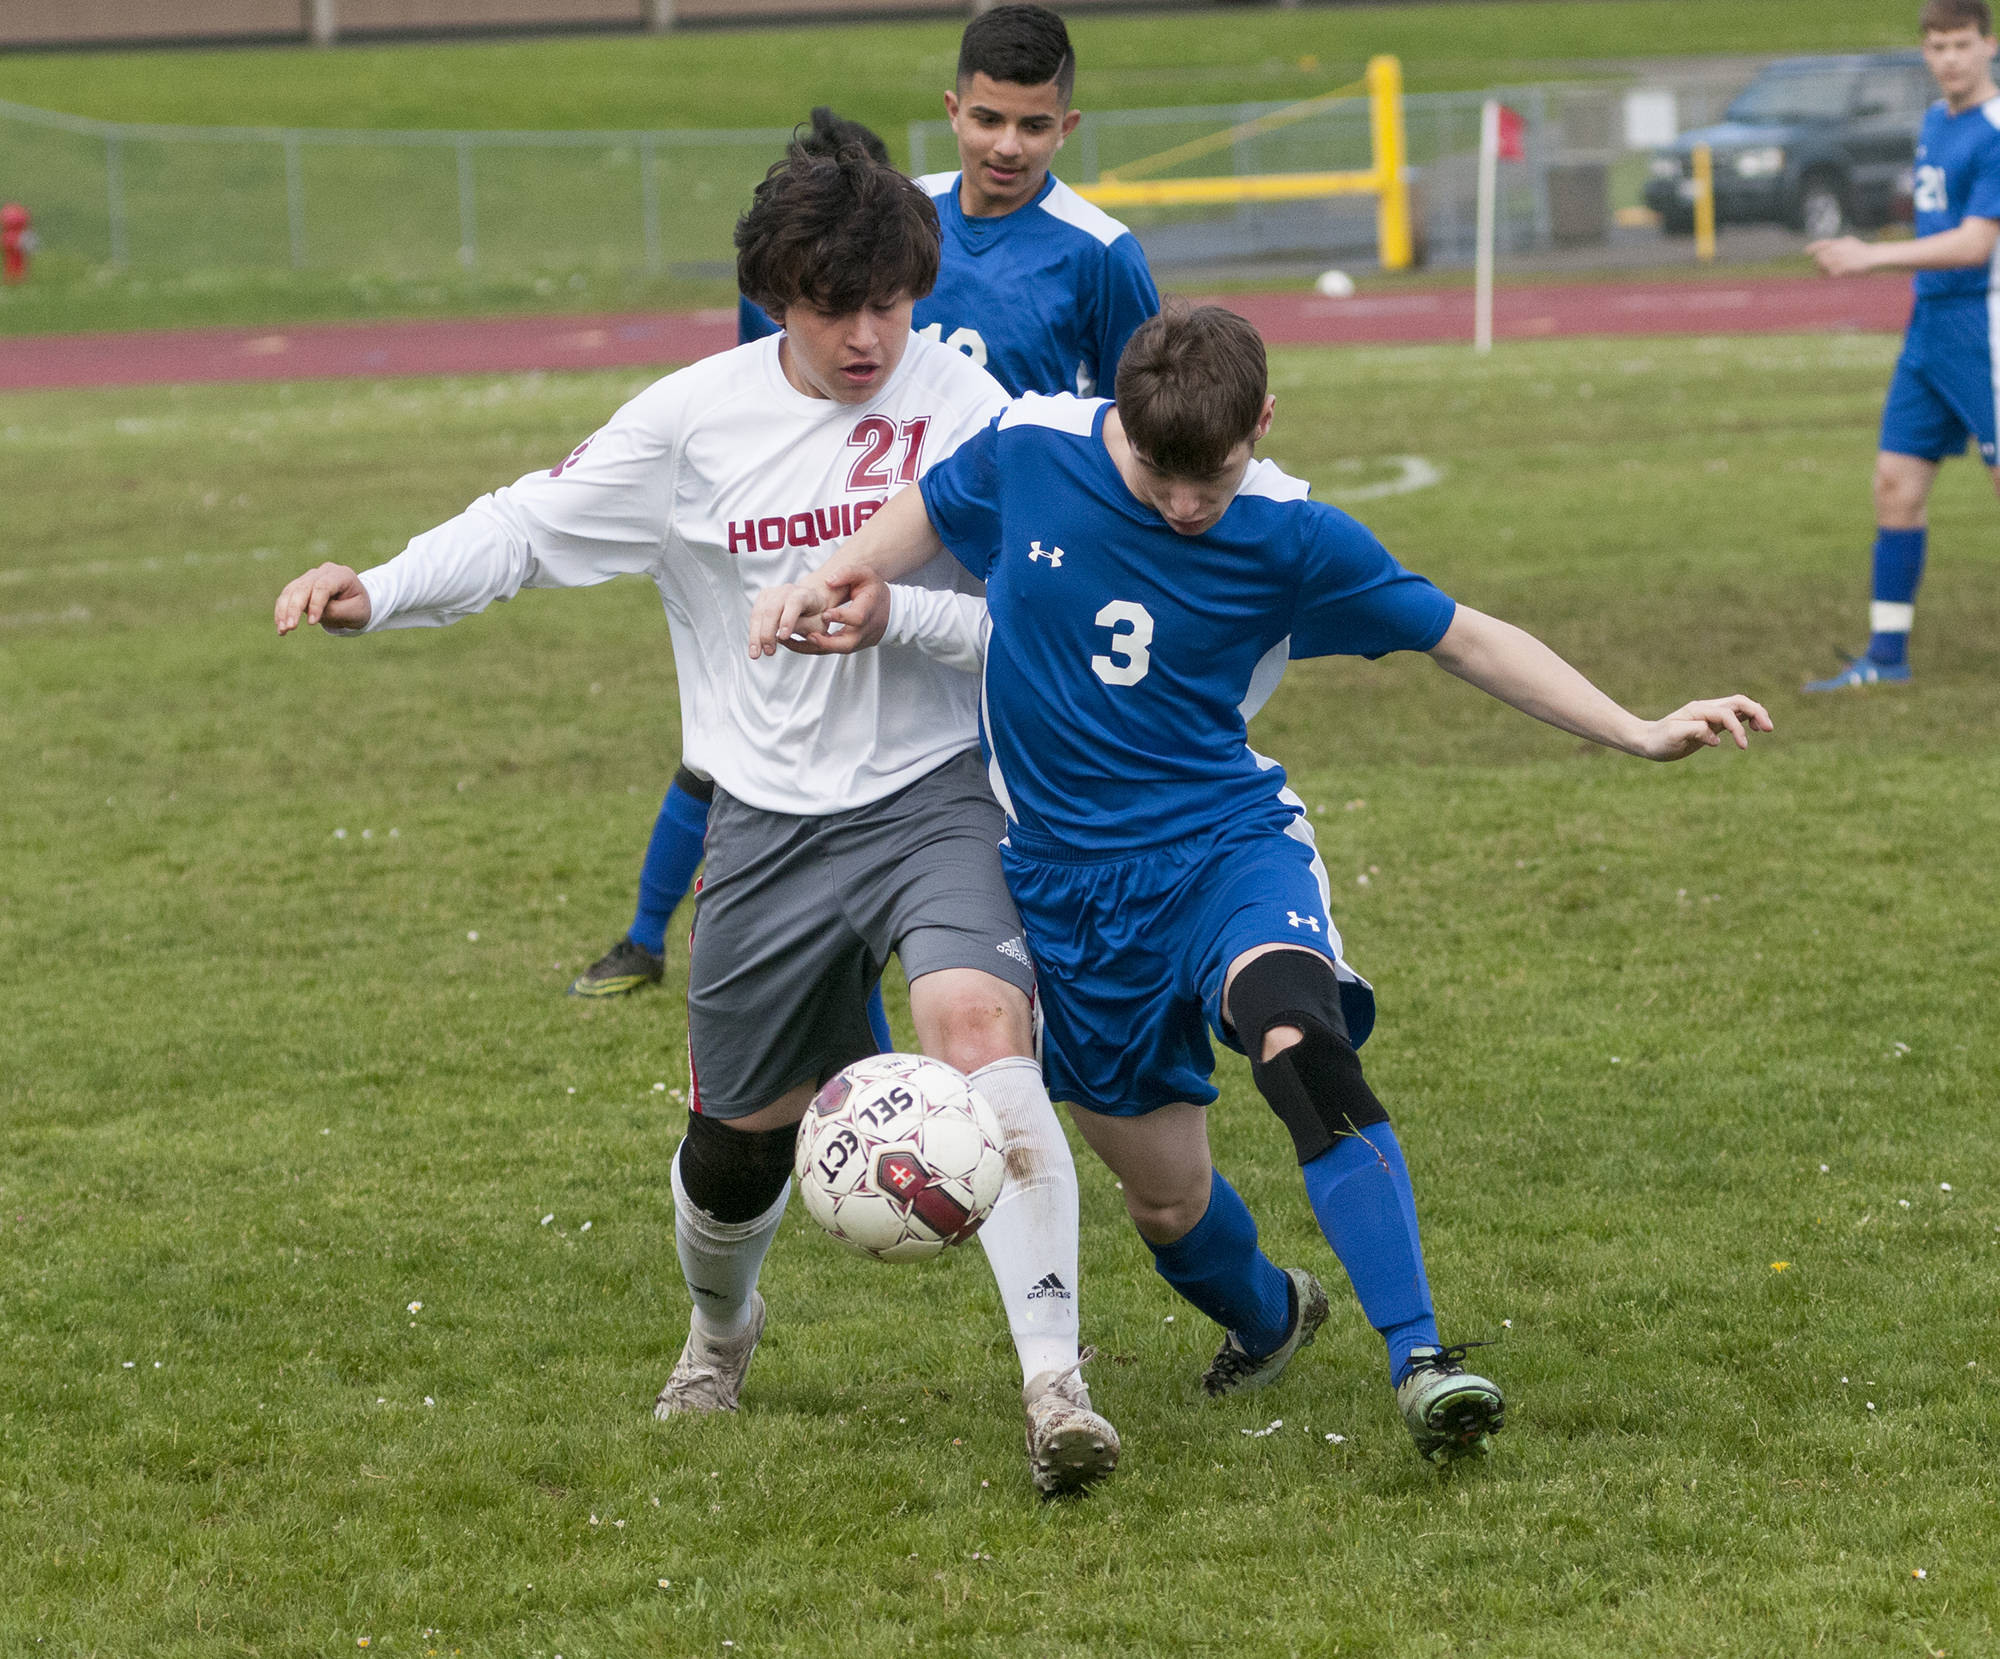 (Brendan Carl | The Daily World) Hoquiam’s Jose Juarez and Elma’s Isaac Horton battle for possession during an Evergreen 1A League match at Sea Breeze Oval on Monday.